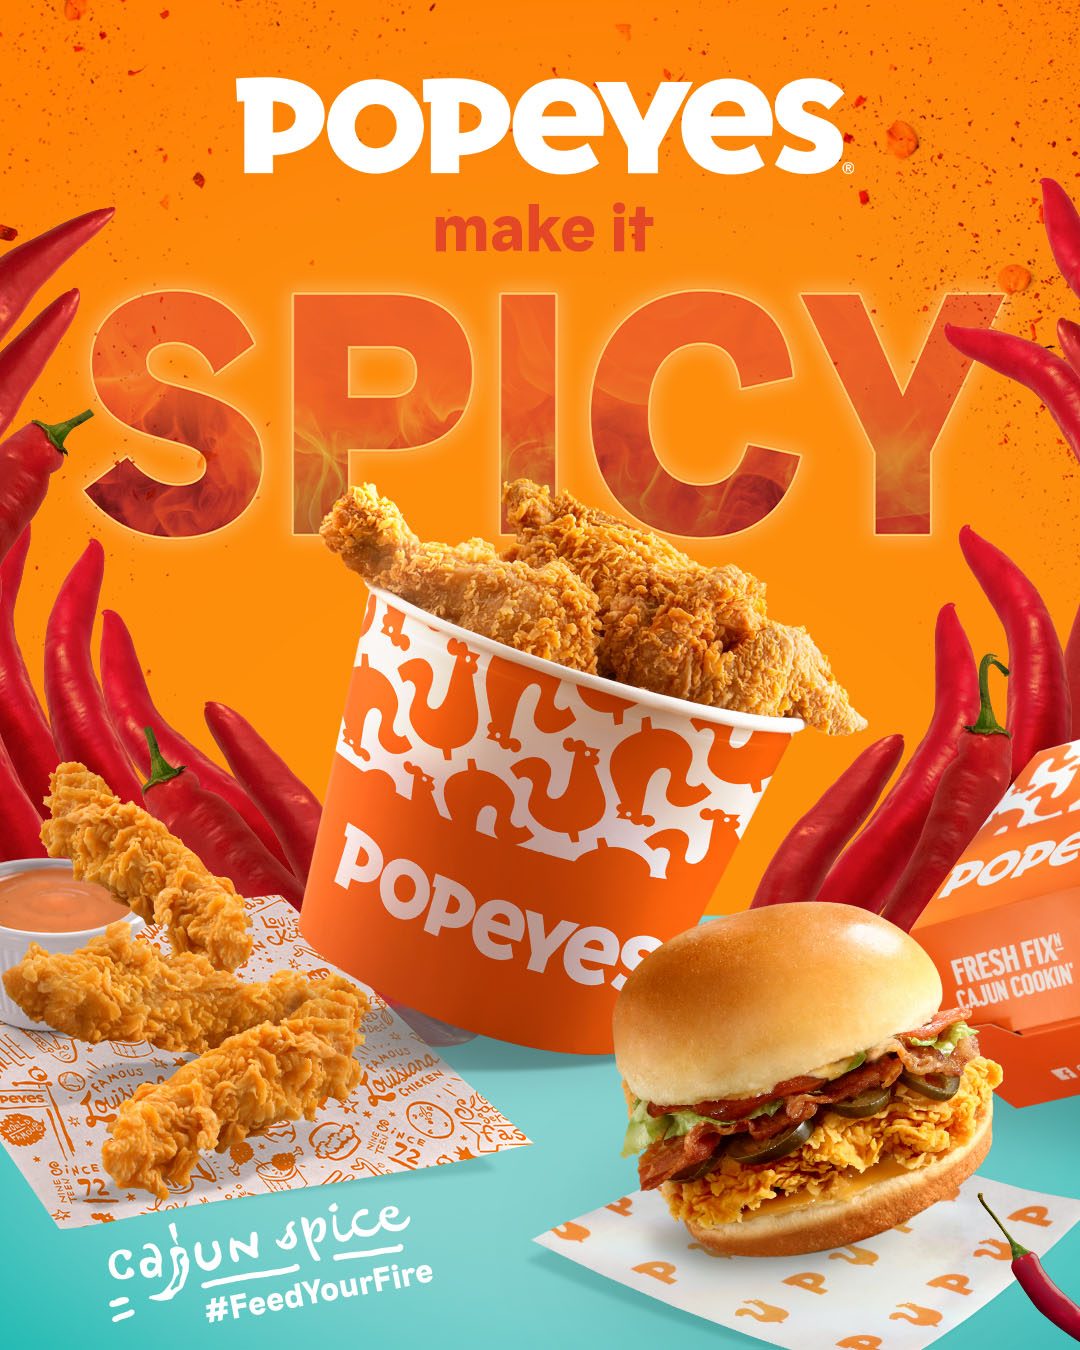 Popeyes brings spicy fried chicken to Metro Manila